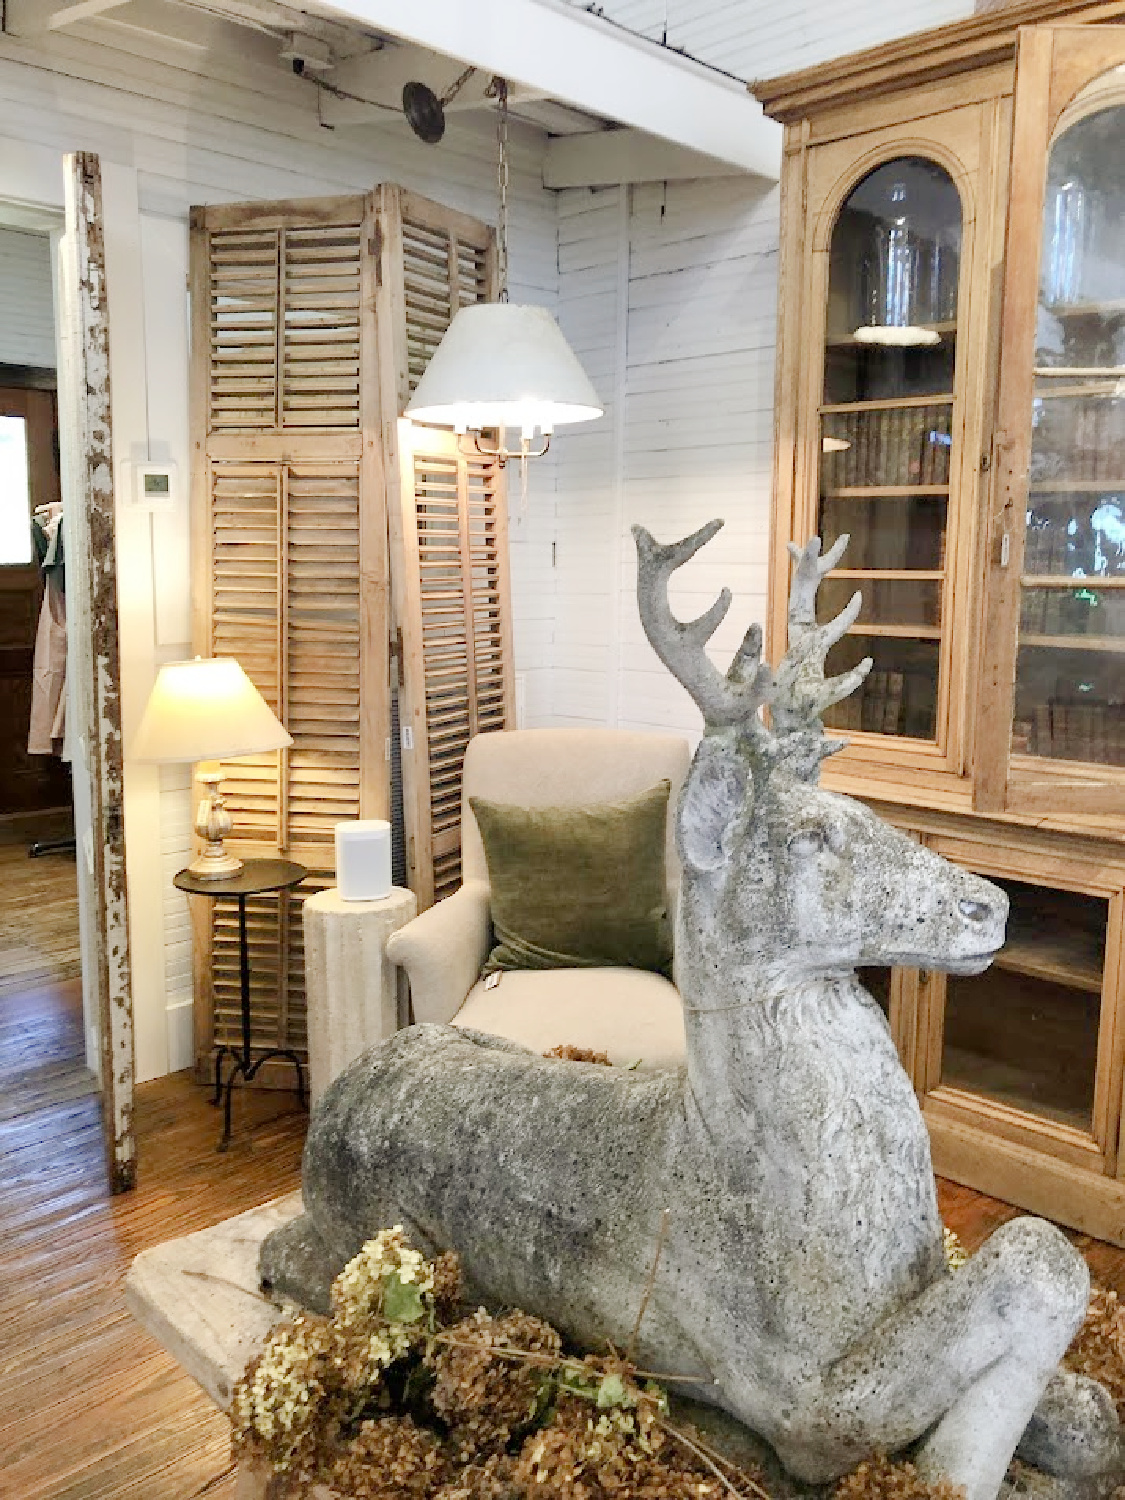 Deer, antiques, shutters, and home goods in Patina Home & Garden shop from Giannettis in Leiper's Fork, TN - Hello Lovely Studio. #patinahome #leipersforktn